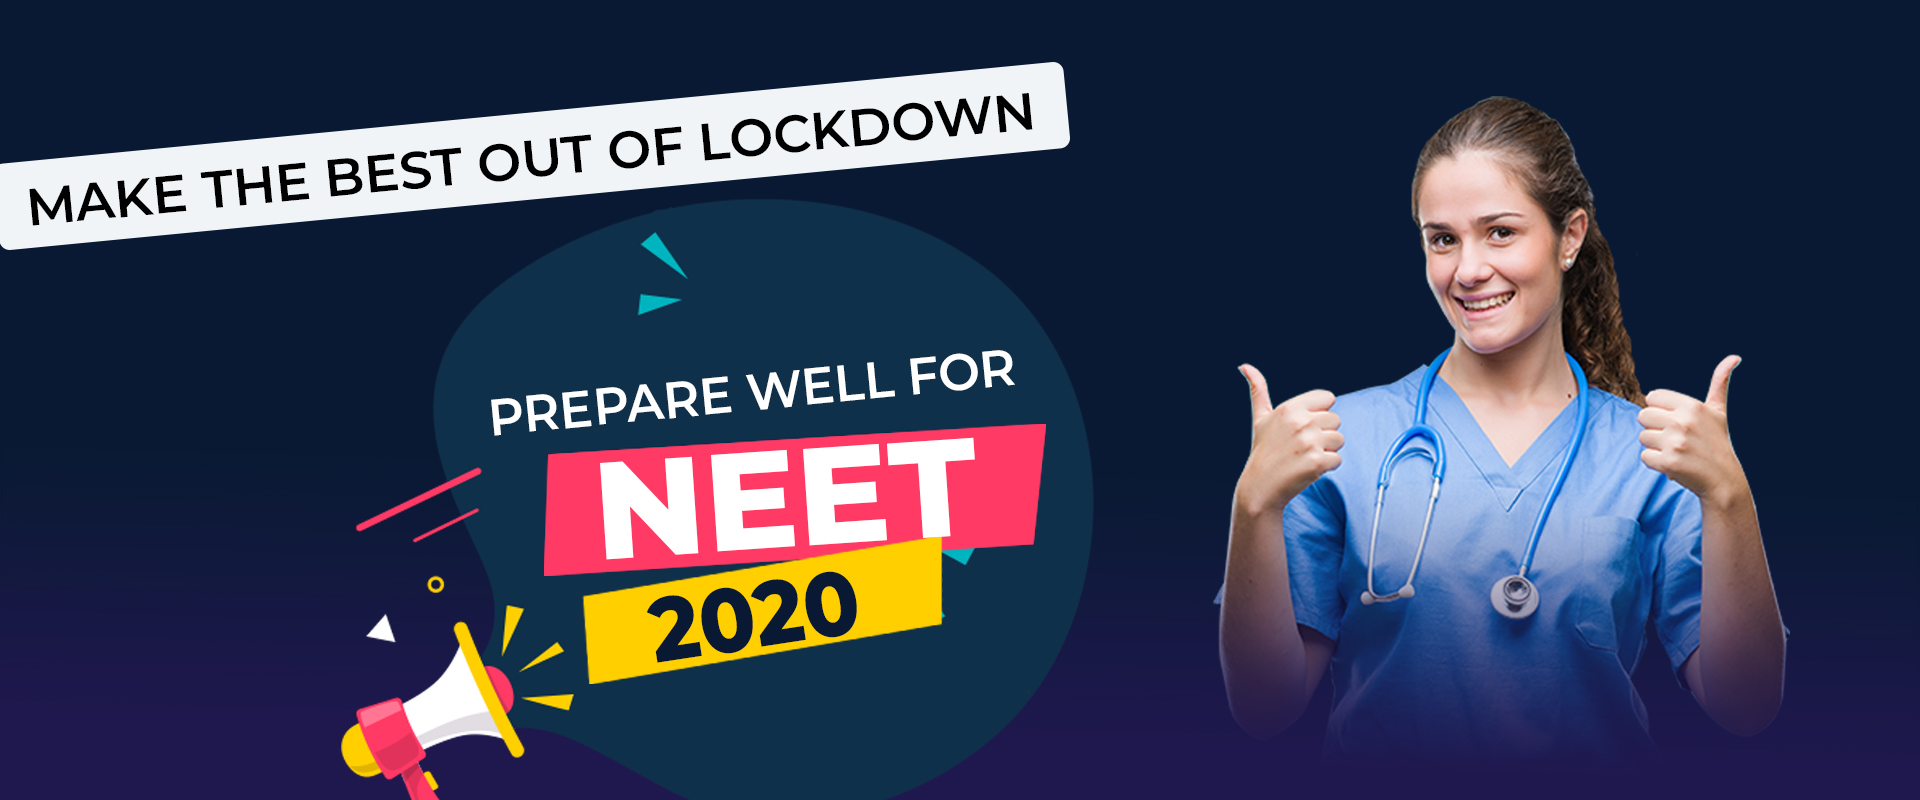 Make the best out of lockdown â€“ prepare well for NEET 2020